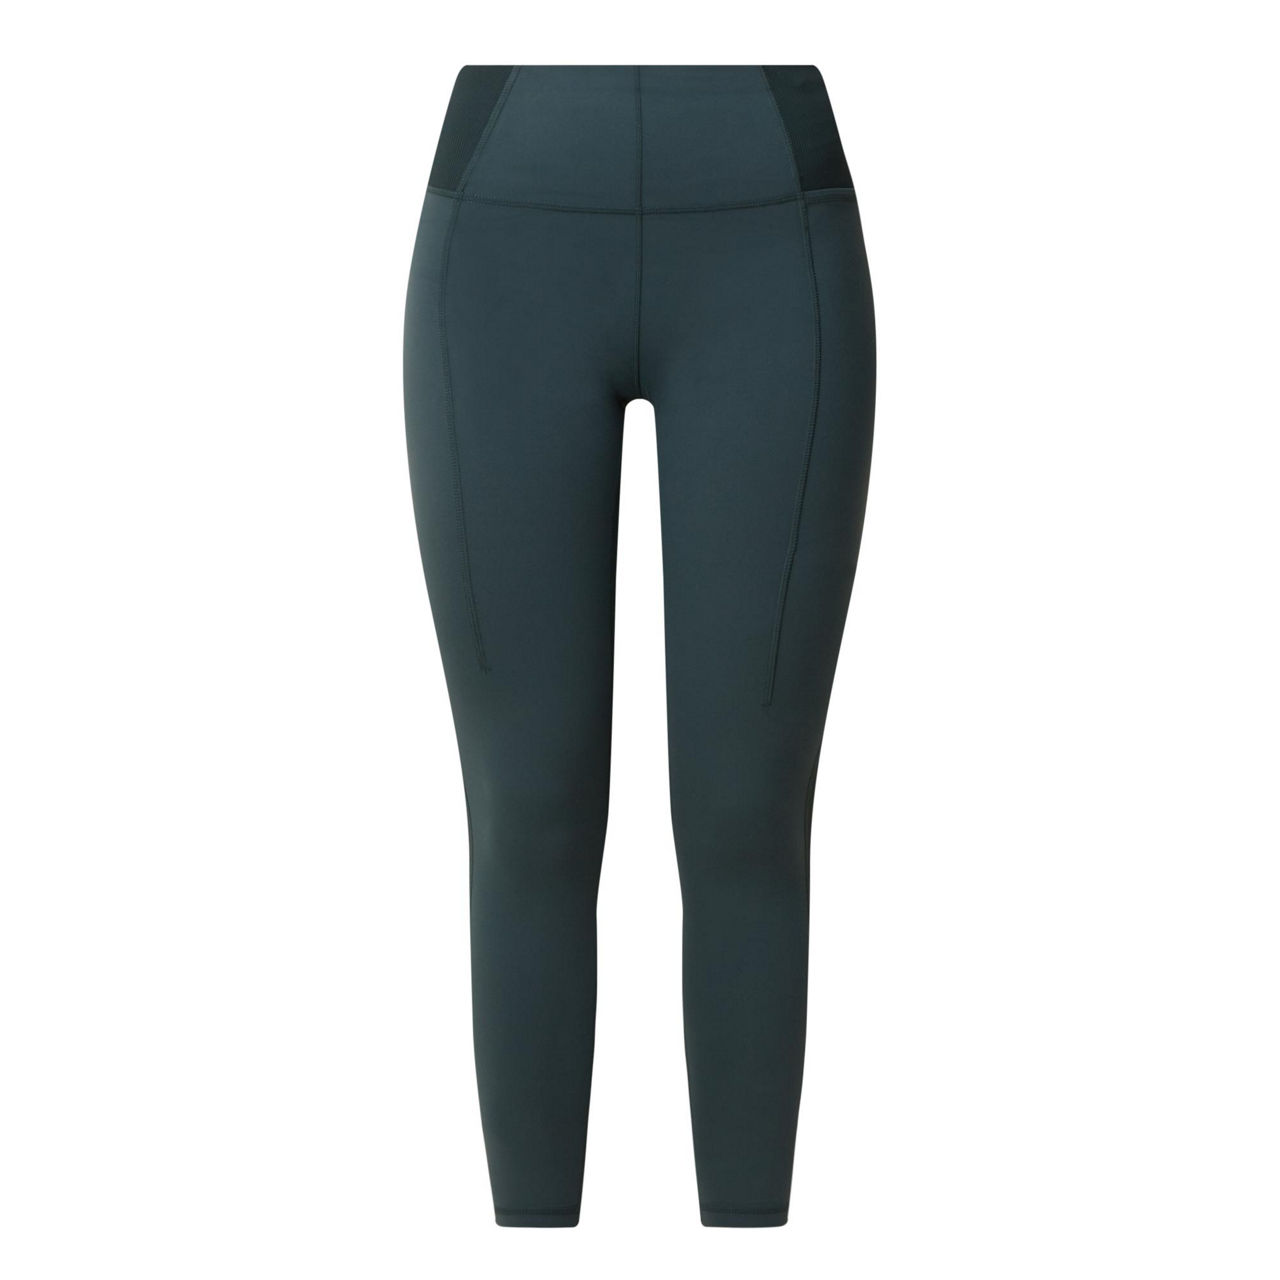 Sage Collective 7/8 ribbed leggings.